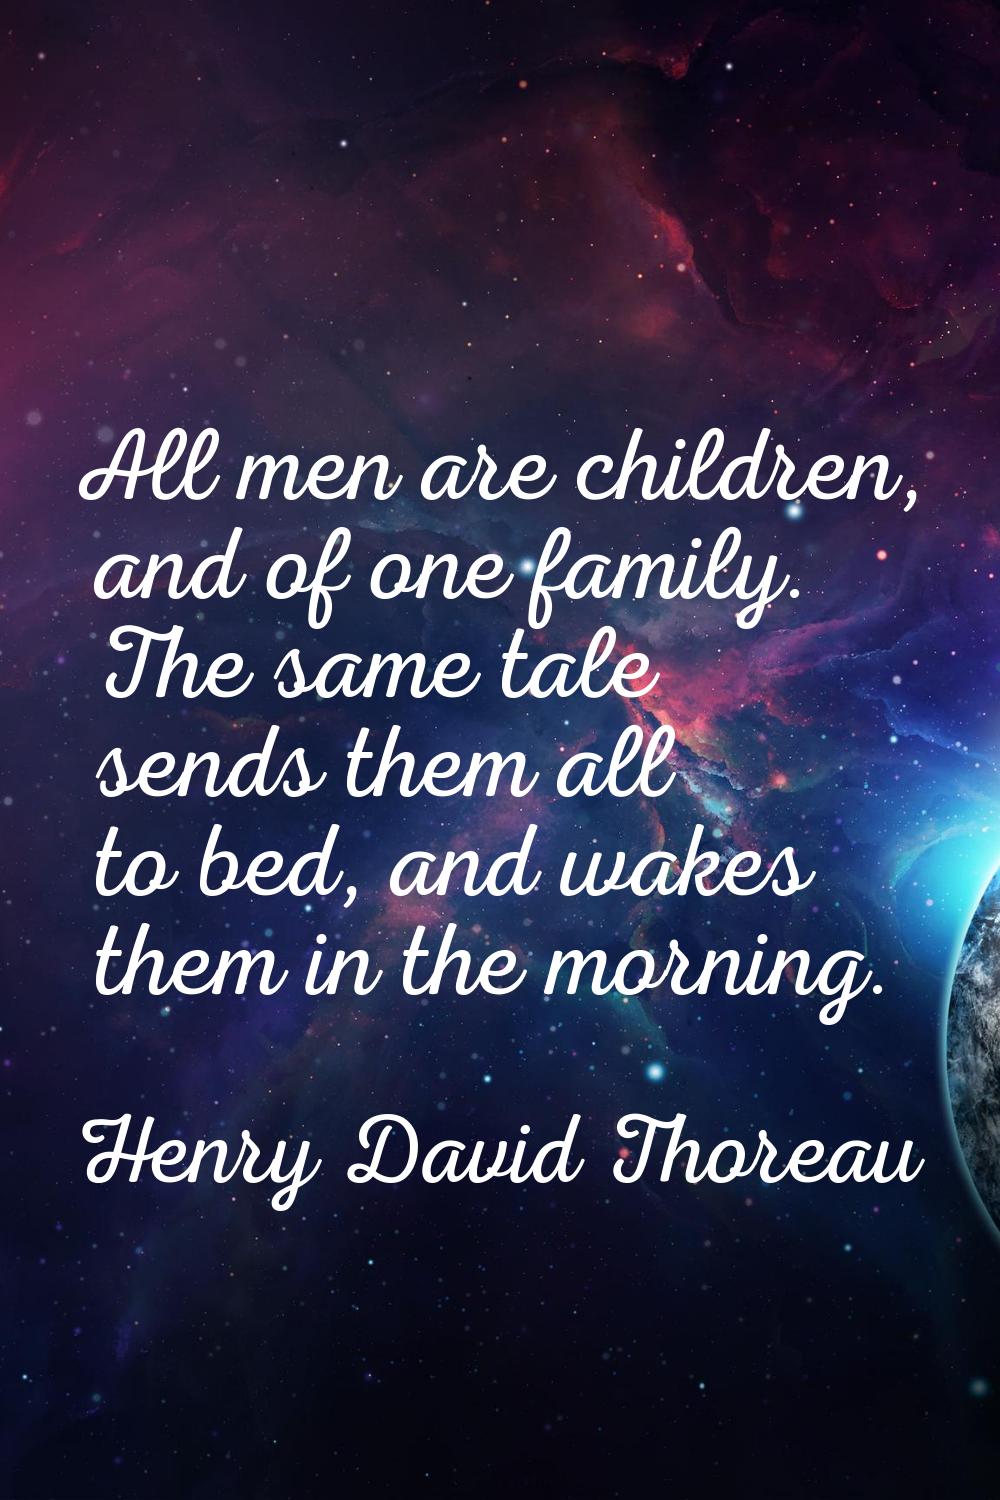 All men are children, and of one family. The same tale sends them all to bed, and wakes them in the